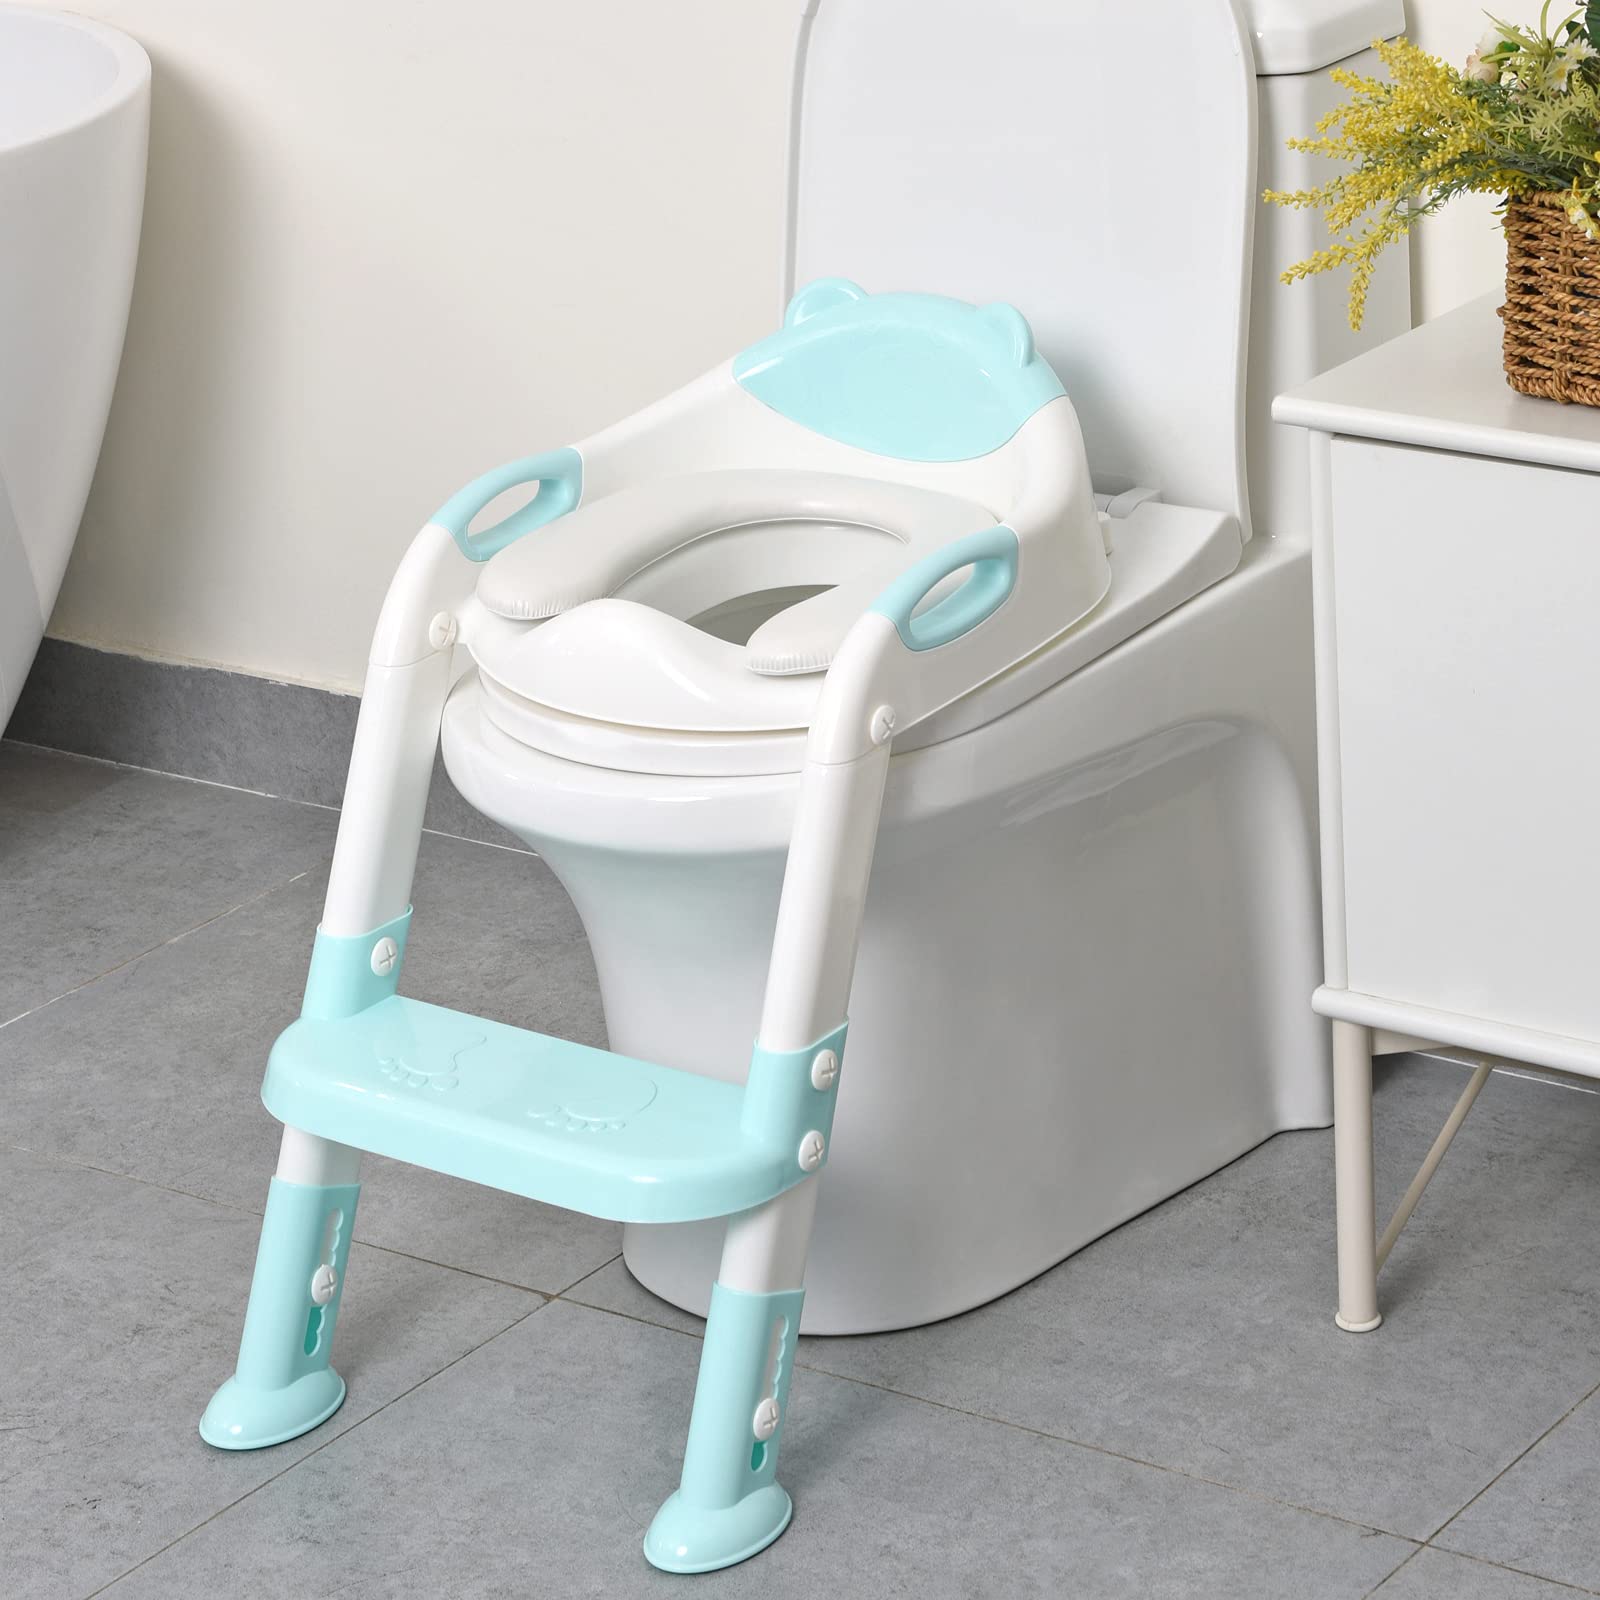 A Potty Training Toilet Seat Baby Portable Toddler Chair Kids Girl Boy  Brand NEW